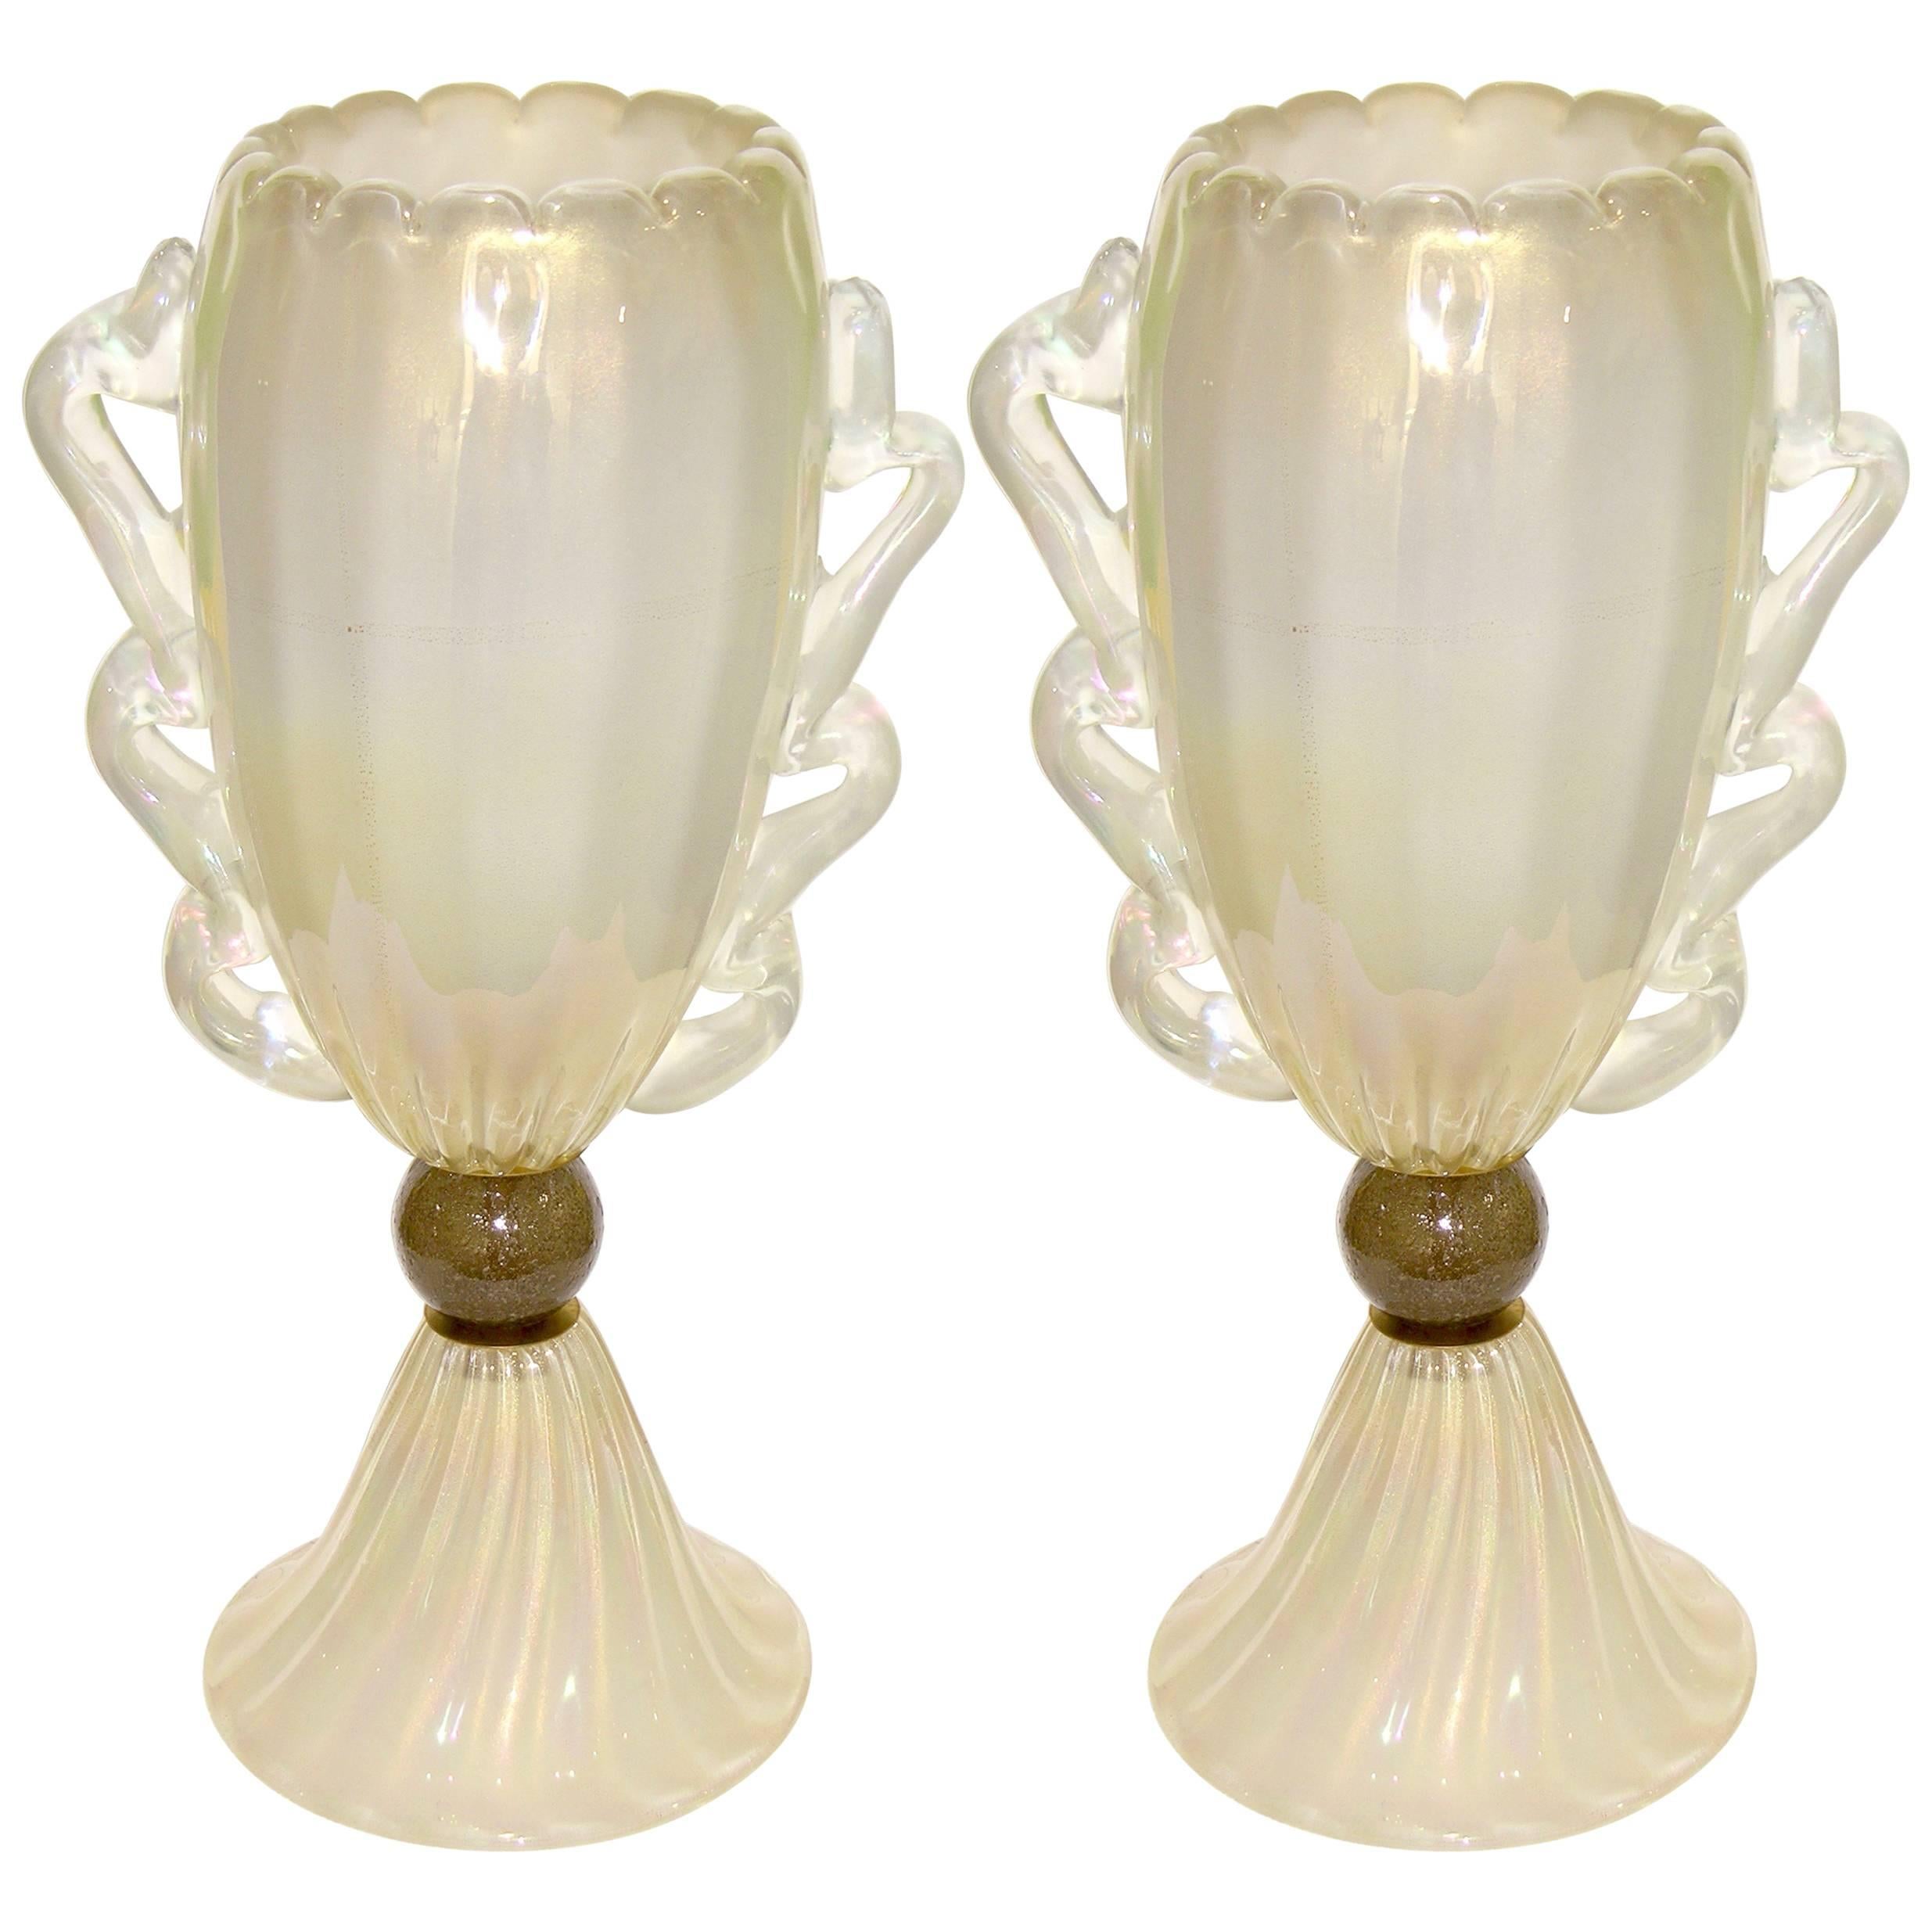 Barovier Toso 1970s Italian Pair of Vintage Gold and Pearl White Glass Lamps